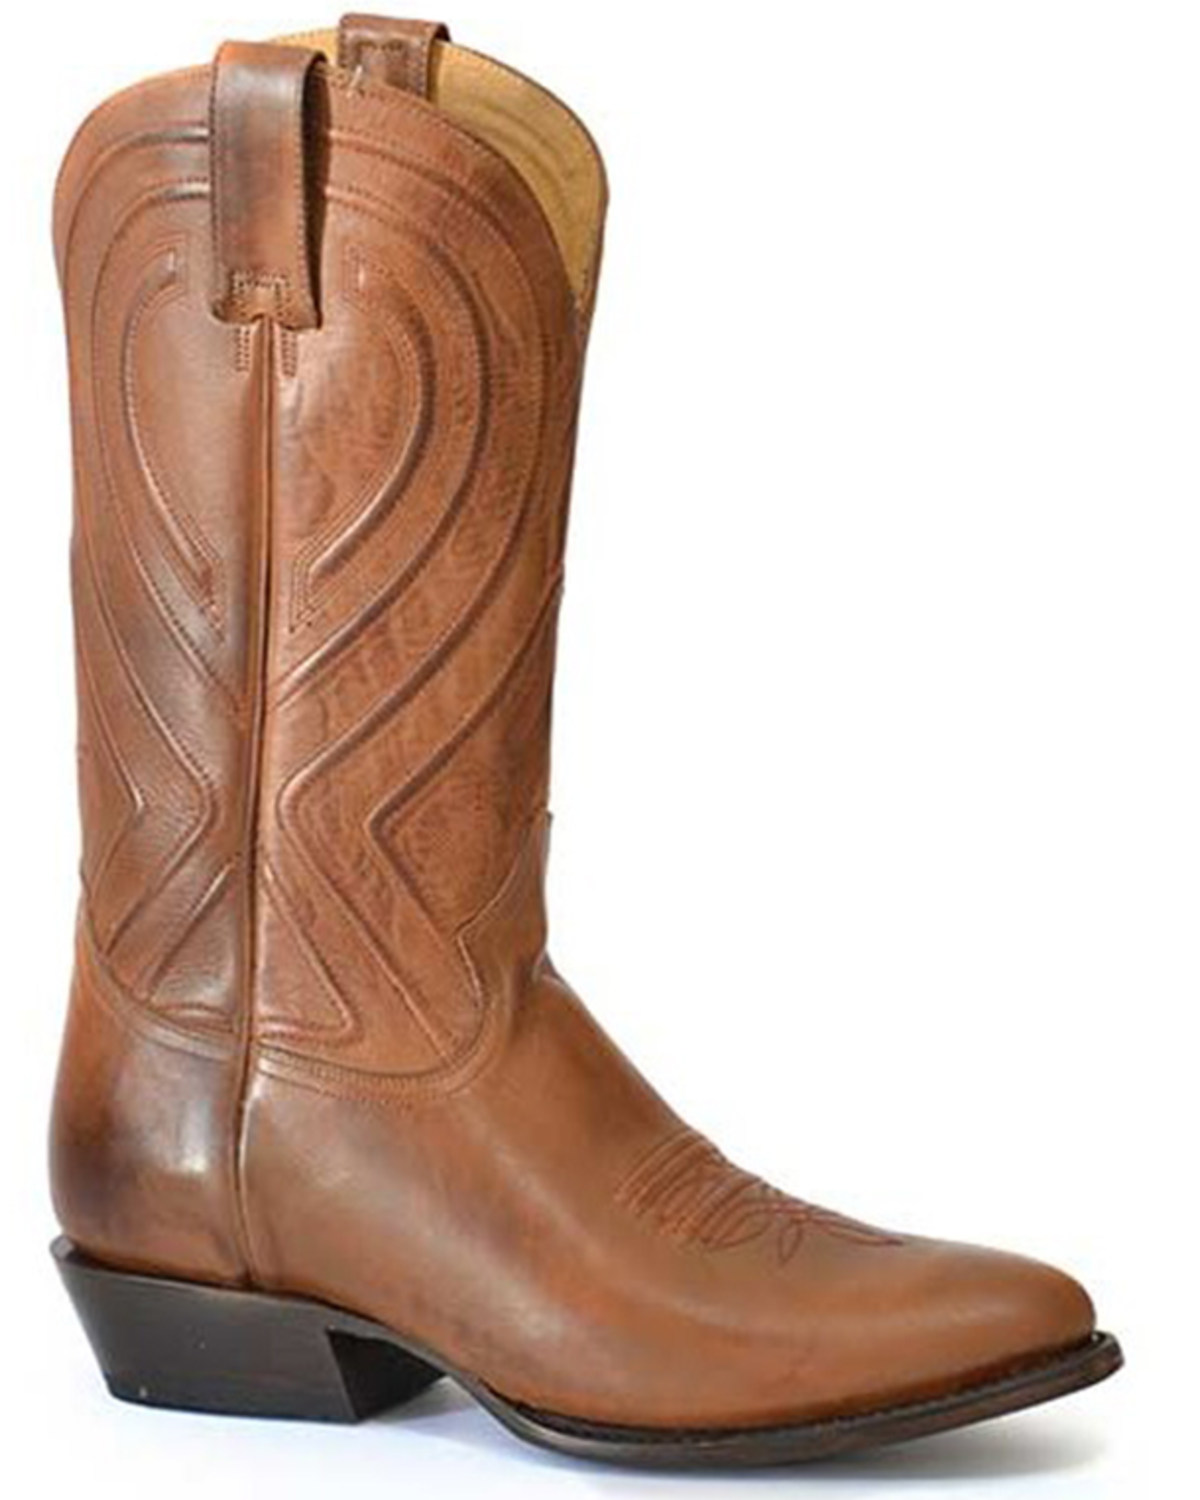 Stetson Men's Mossman Corded Western Boots - Round Toe